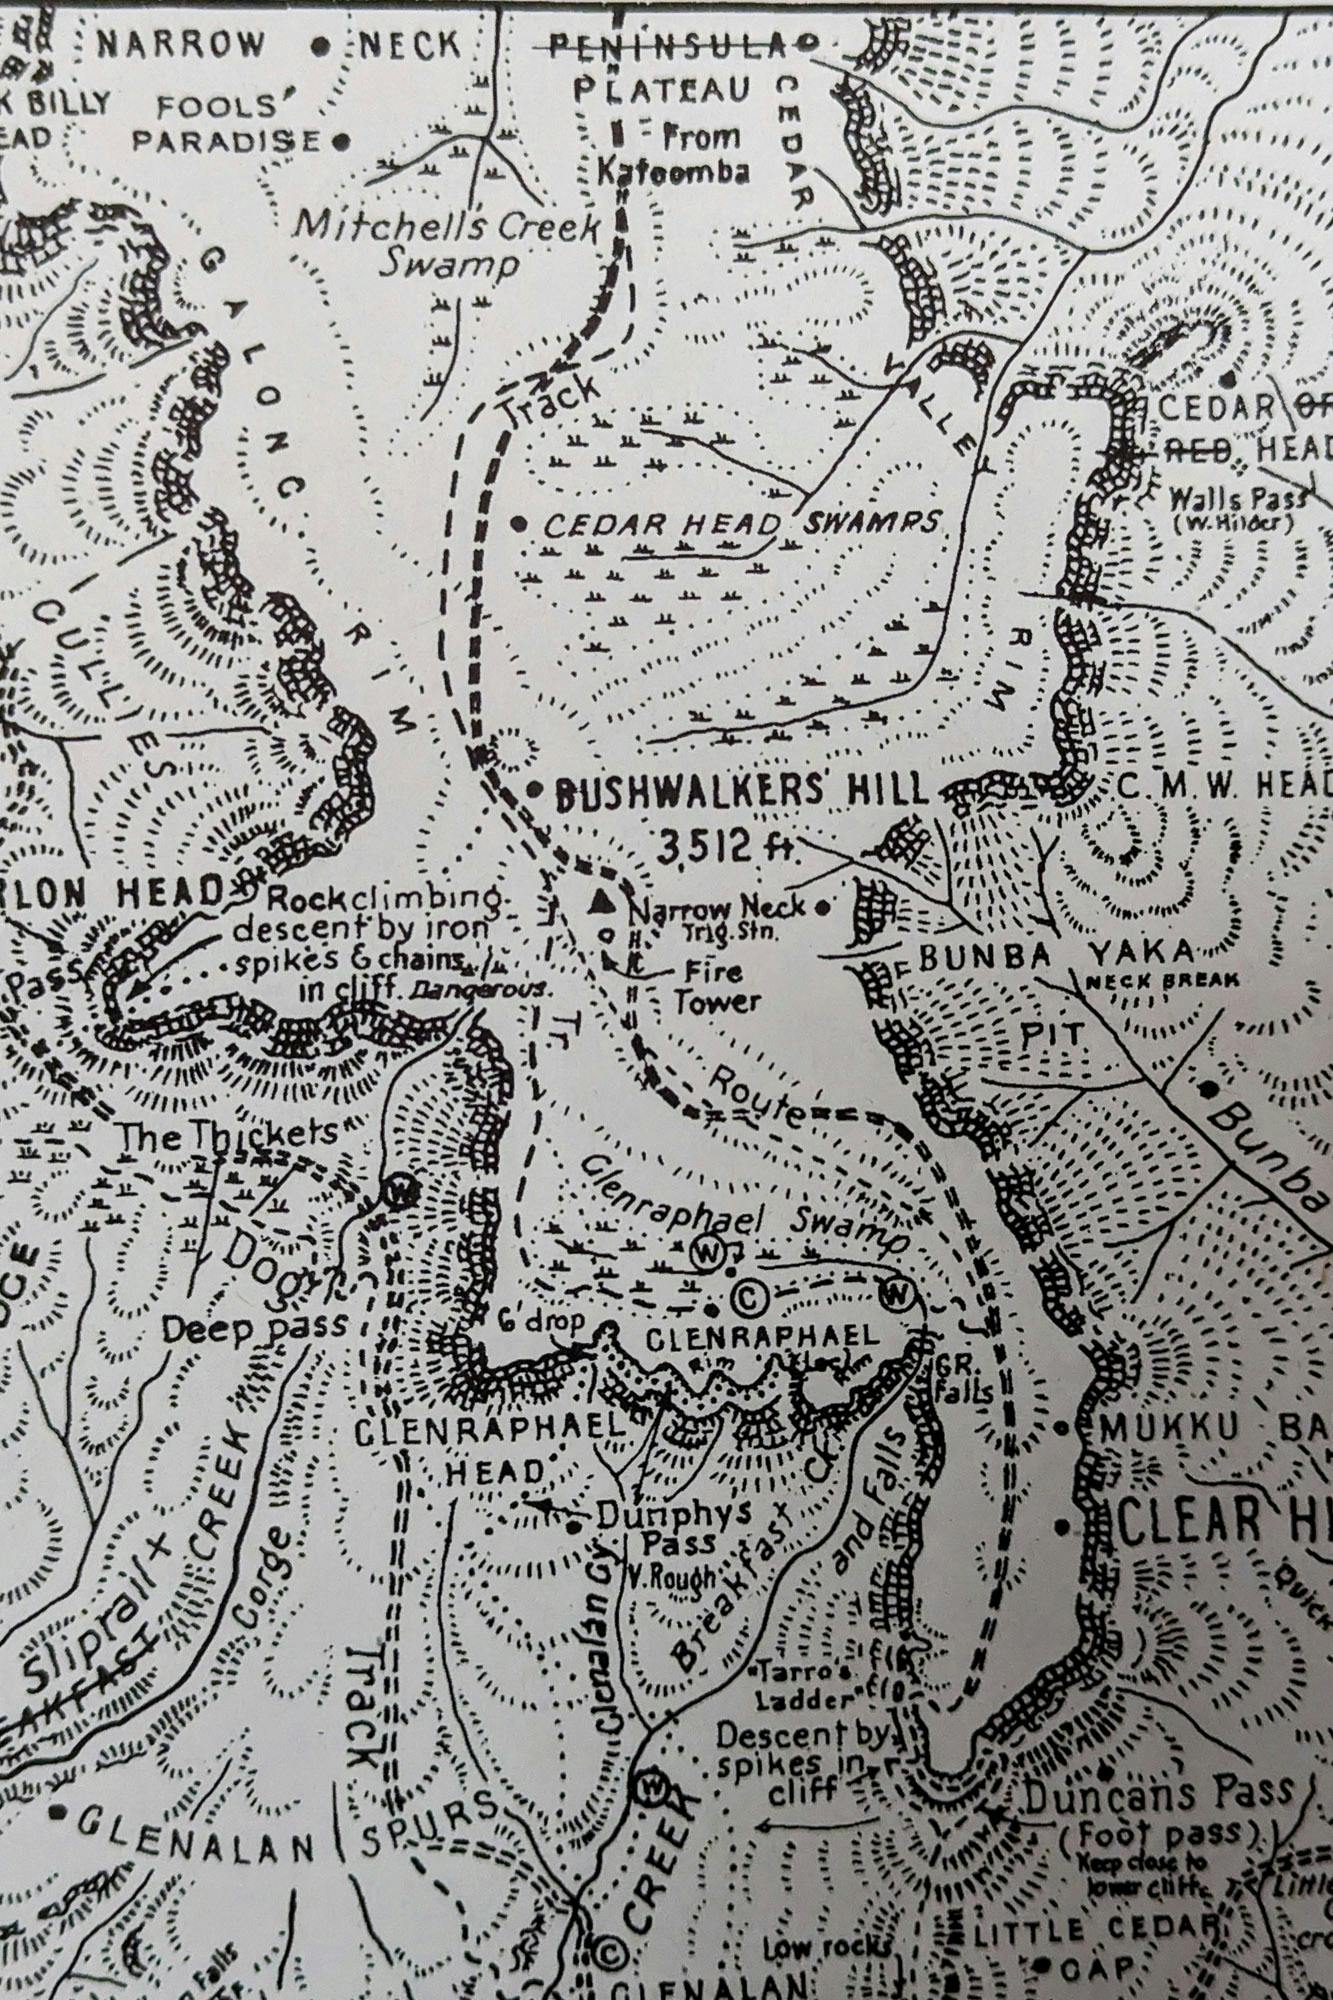 A handdrawn map of the Narrow Neck.